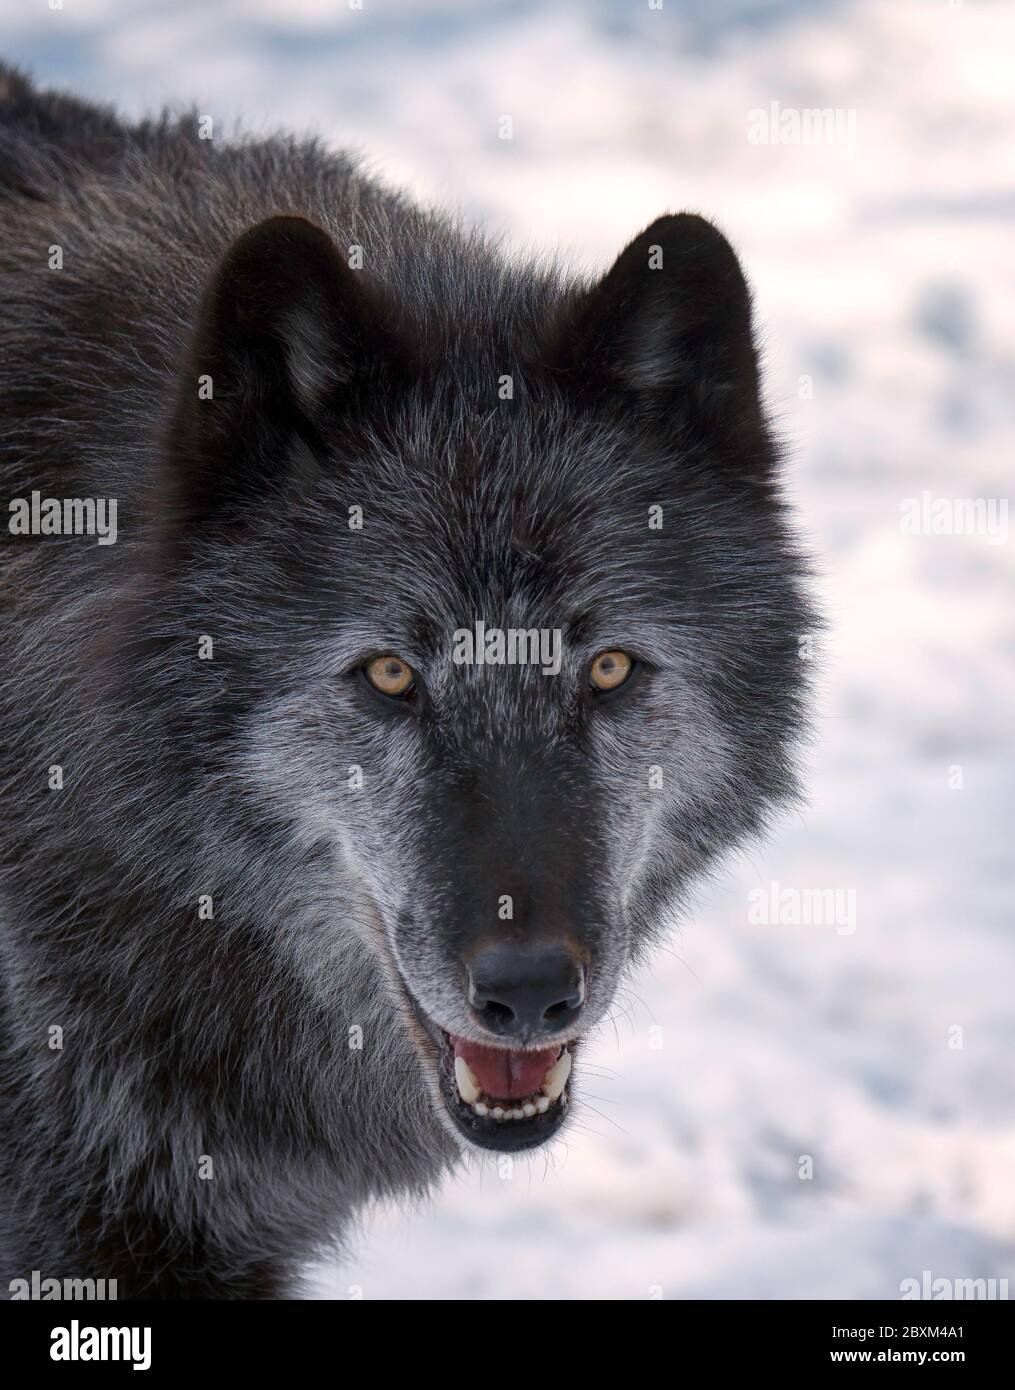 Close up of a Black Timber Wolf (also known as a Gray or Grey Wolf) in the snow Stock Photo